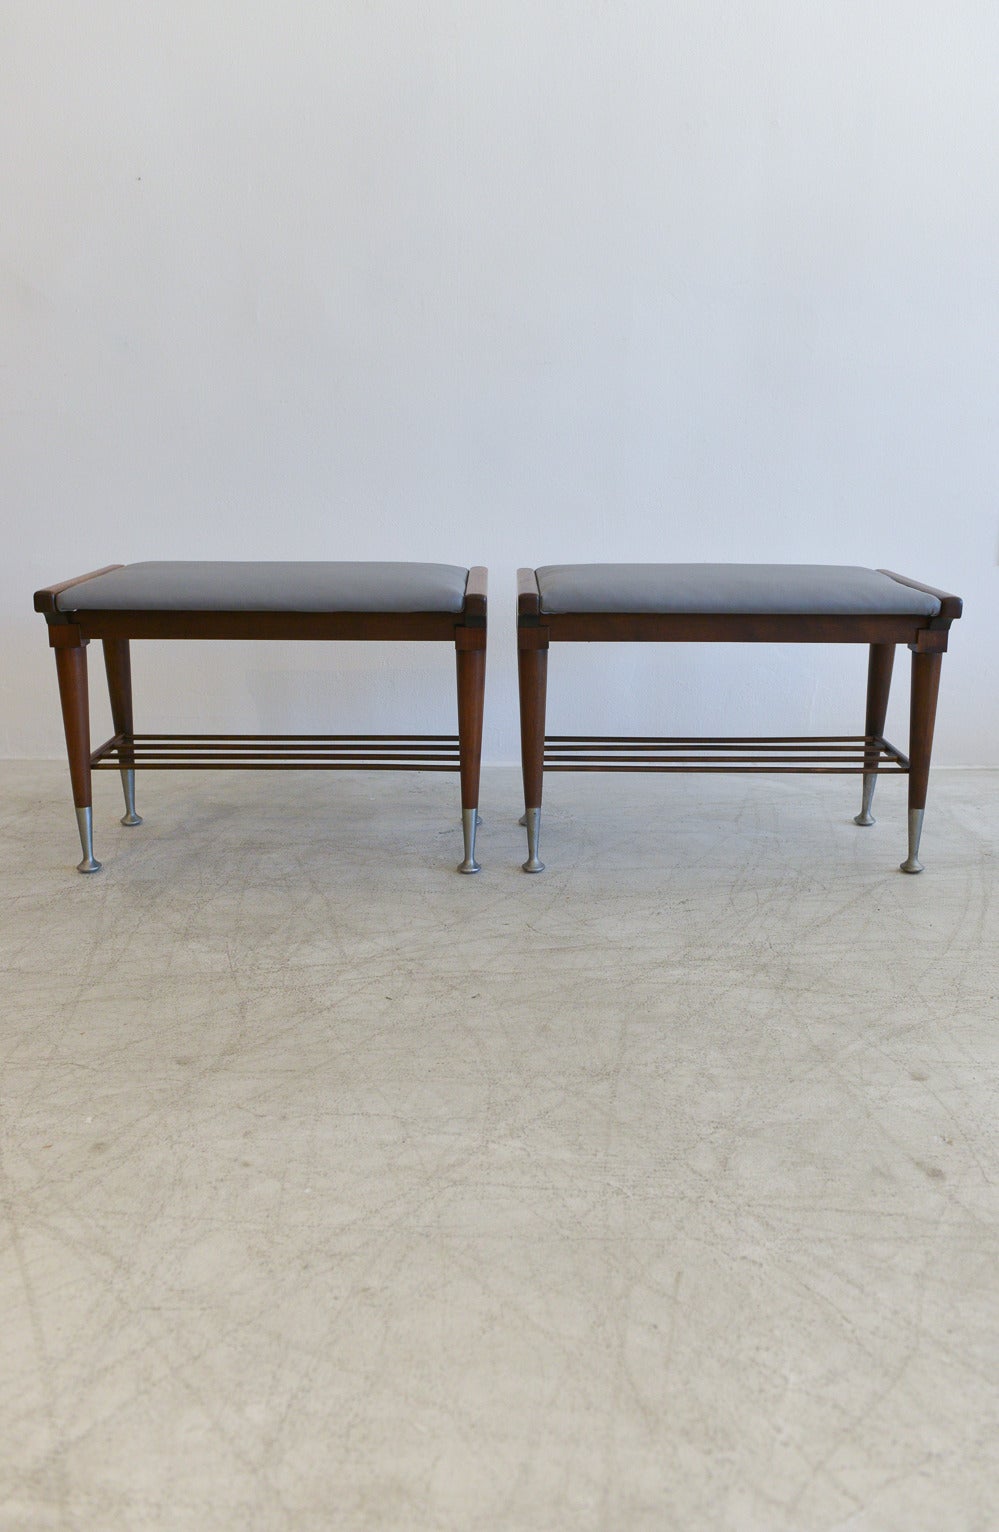 Scandinavian Modern Important Pair of Edmond Spence Walnut and Leather Benches